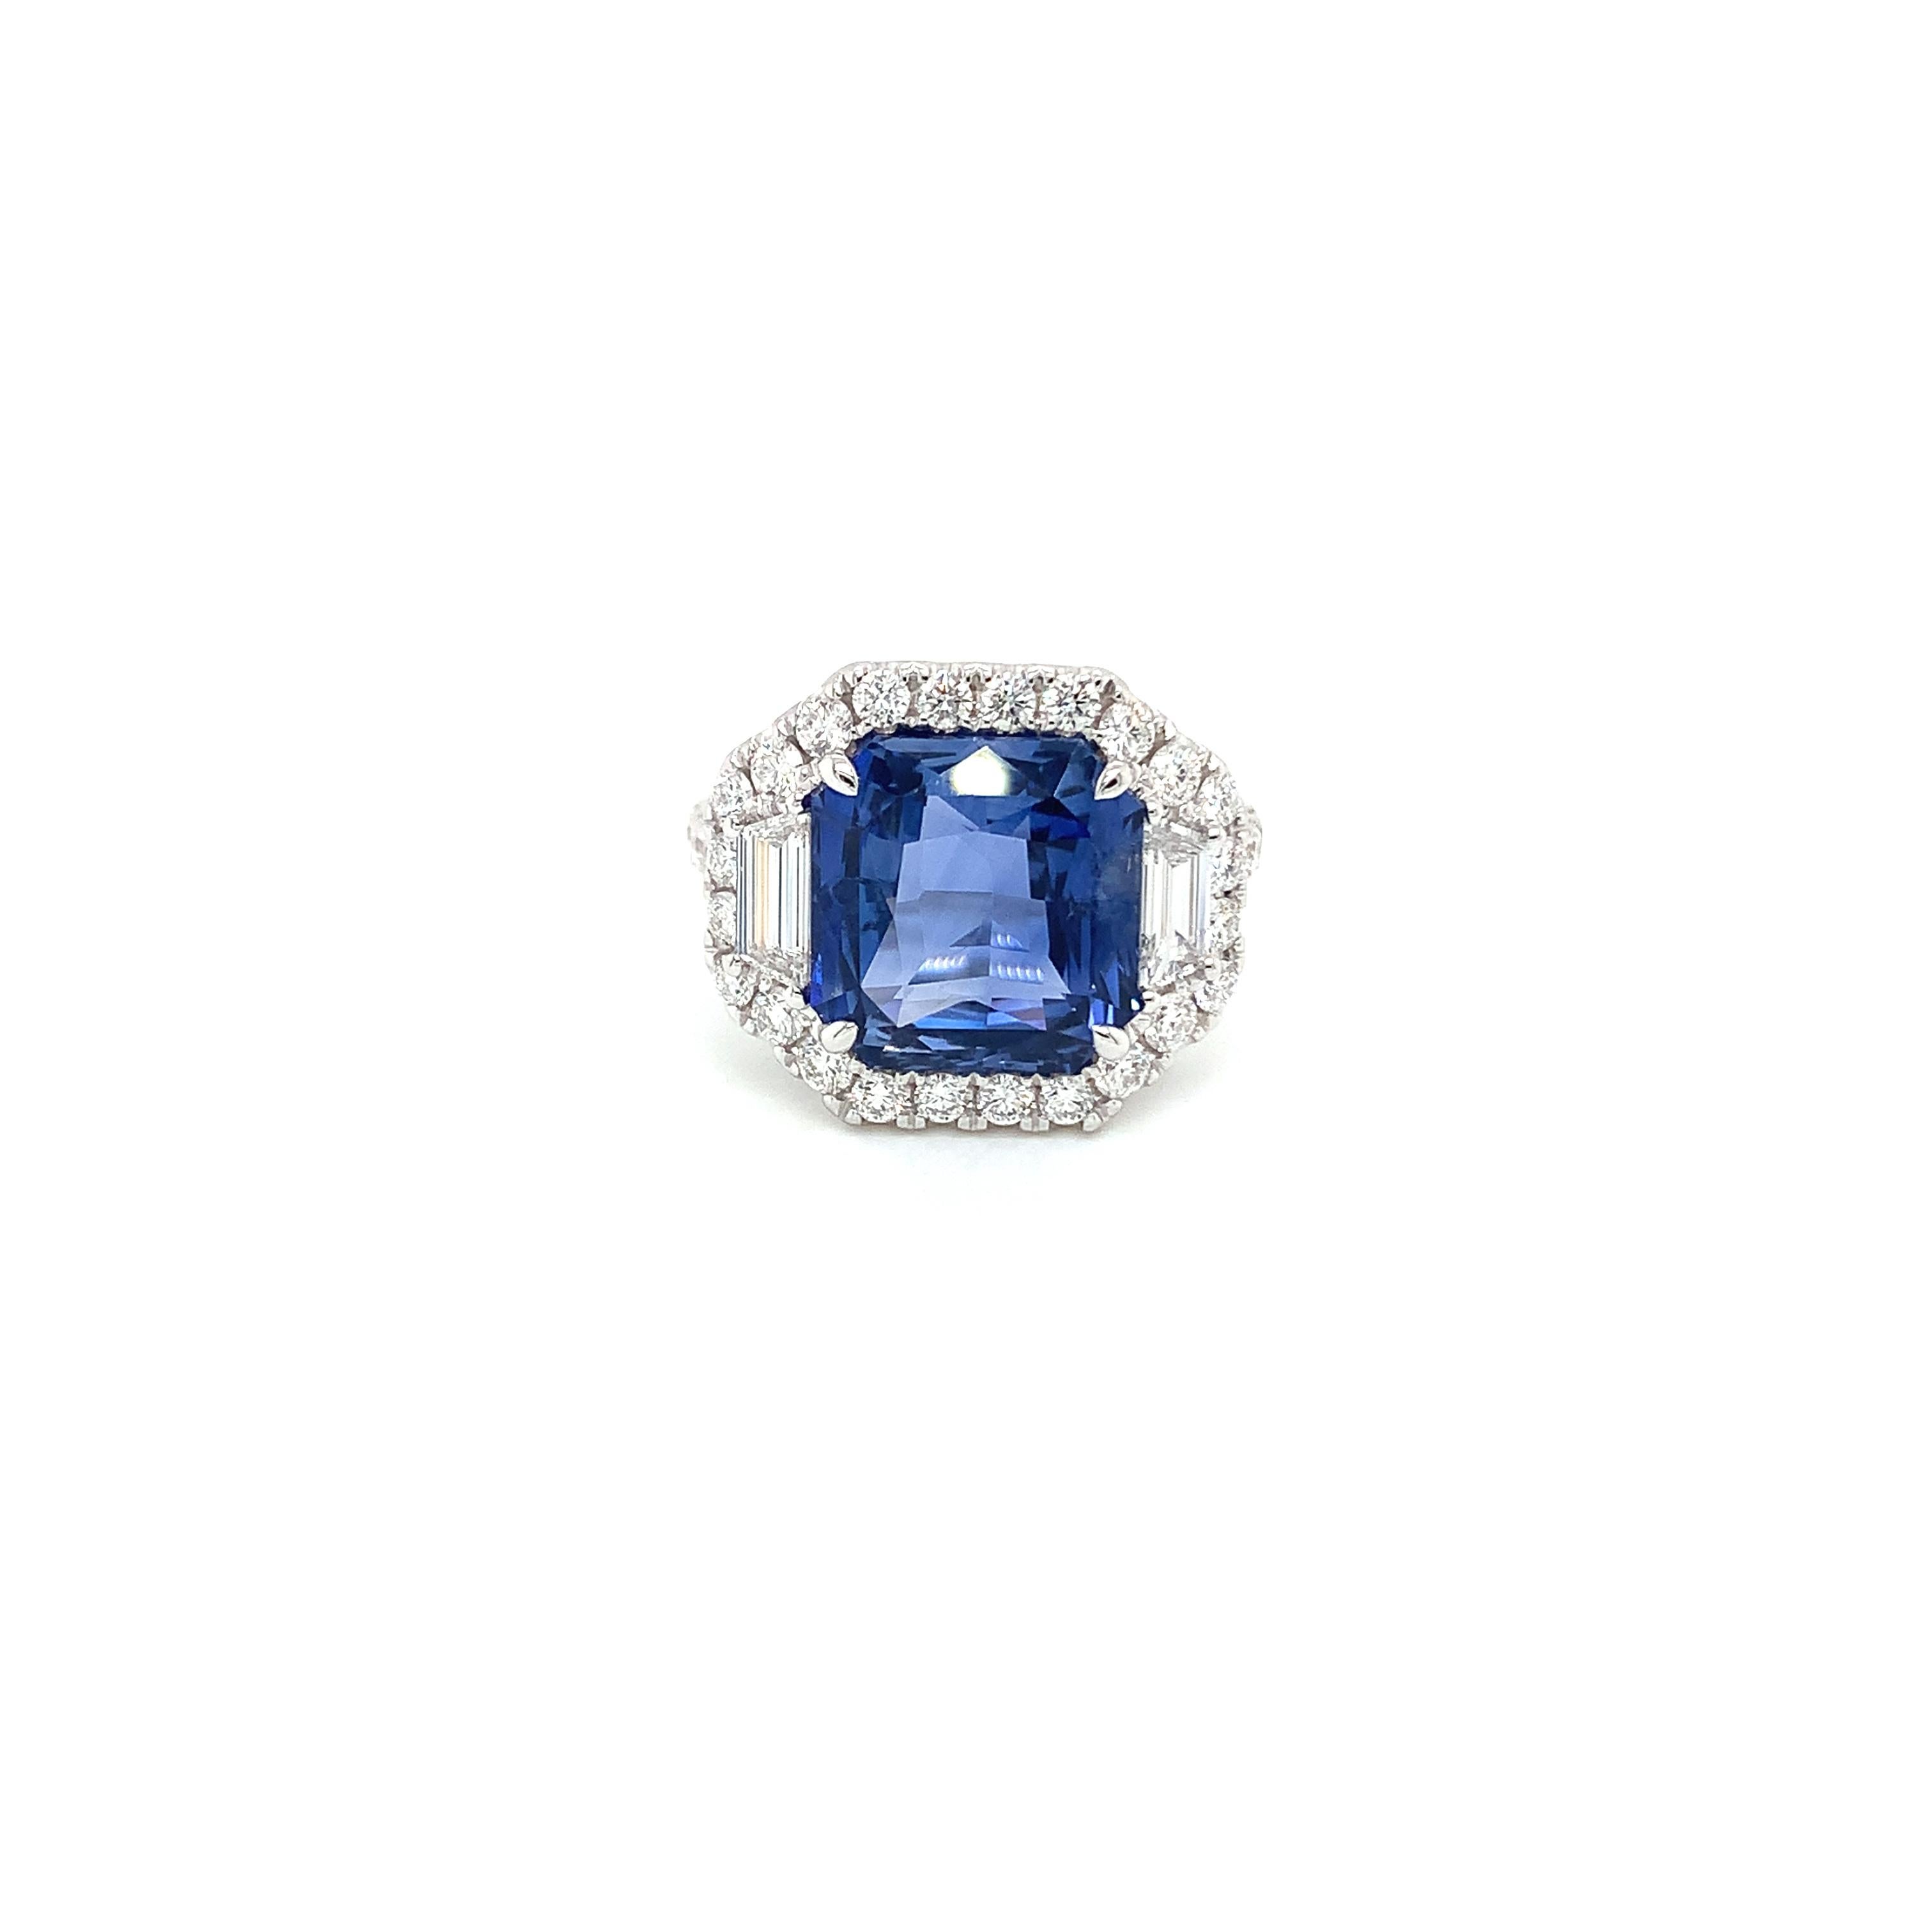 Emerald cut blue sapphire weighing 7.96 cts
Measuring (10.8x10.6) mm
34 pieces of round diamonds weighing .88 cts.
Two trapezoid diamonds weighing .38 cts
Measuring (6.02x2.37) mm
Set in 18k white gold ring
5.59 grams